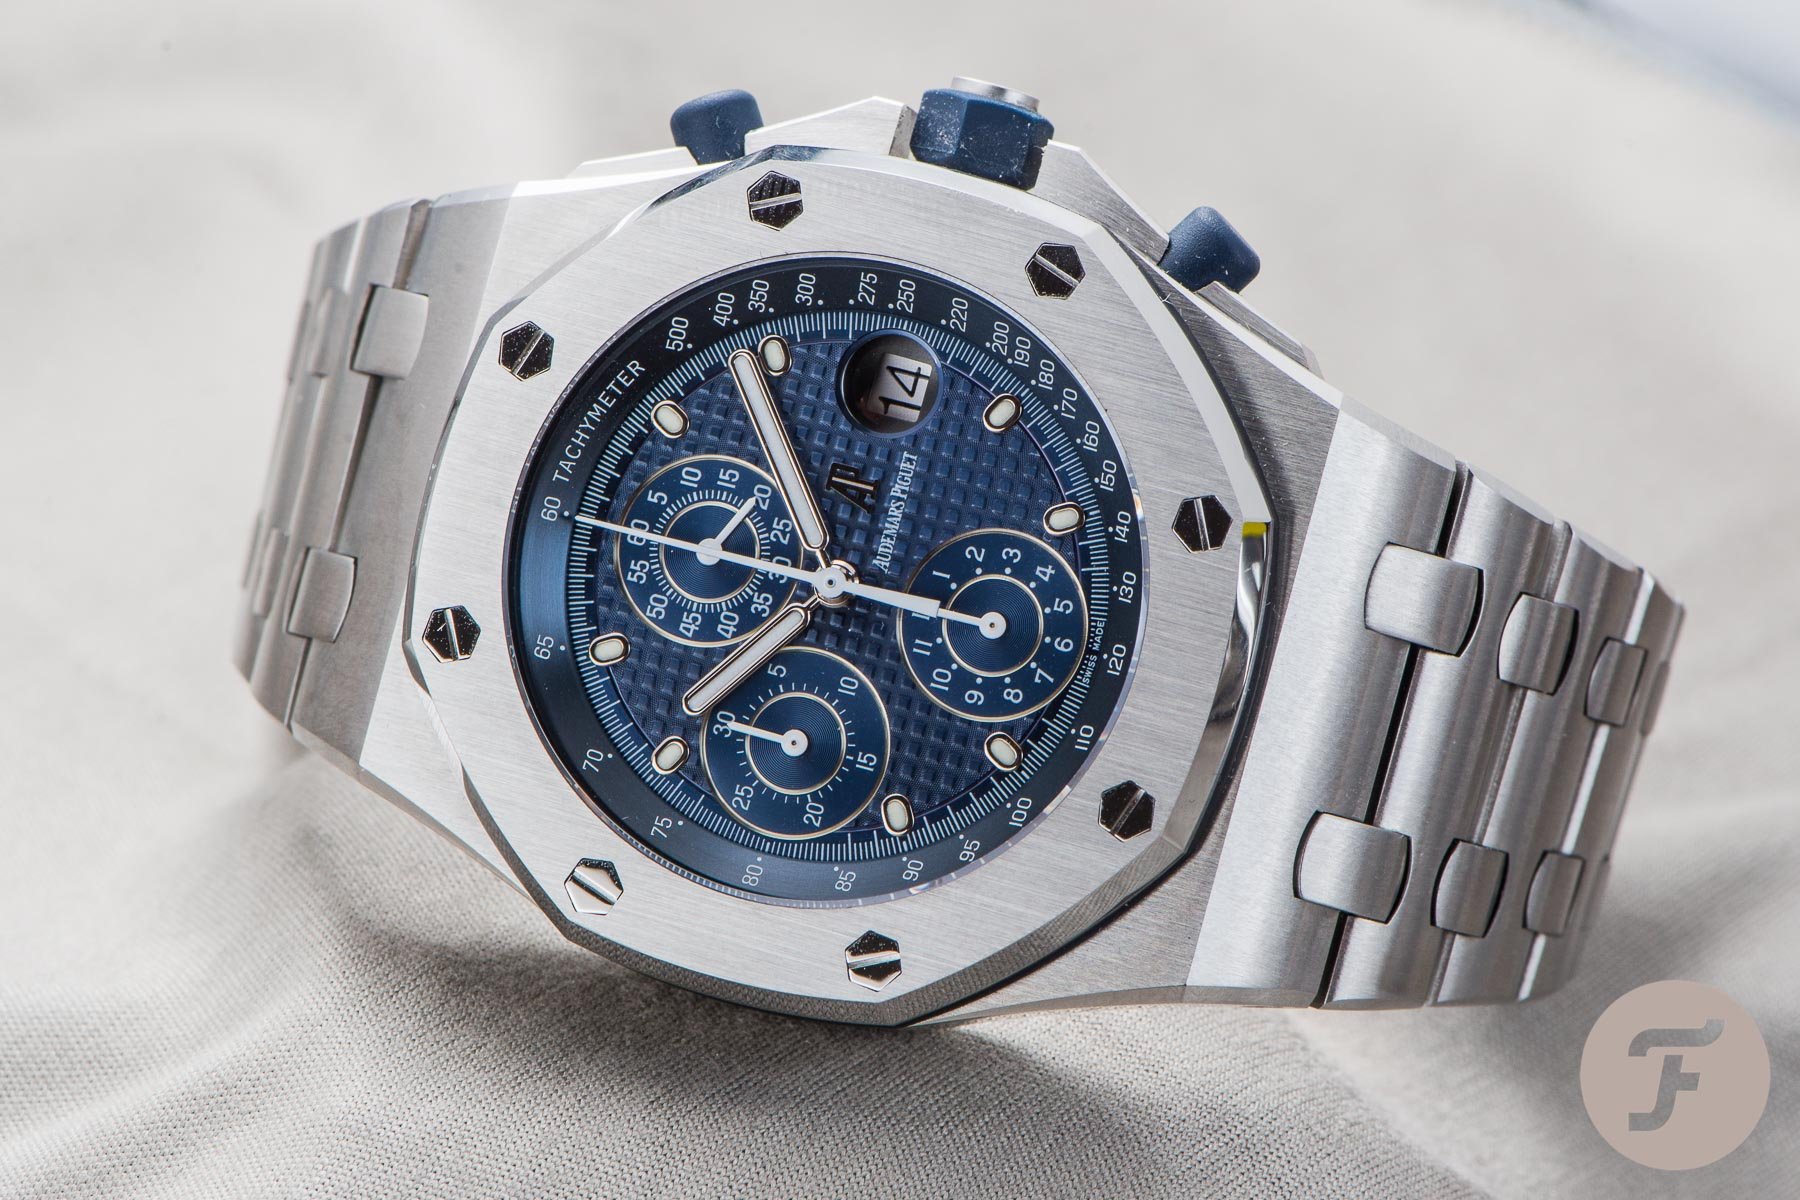 The Royal Oak Offshore celebrates its 30th Anniversary